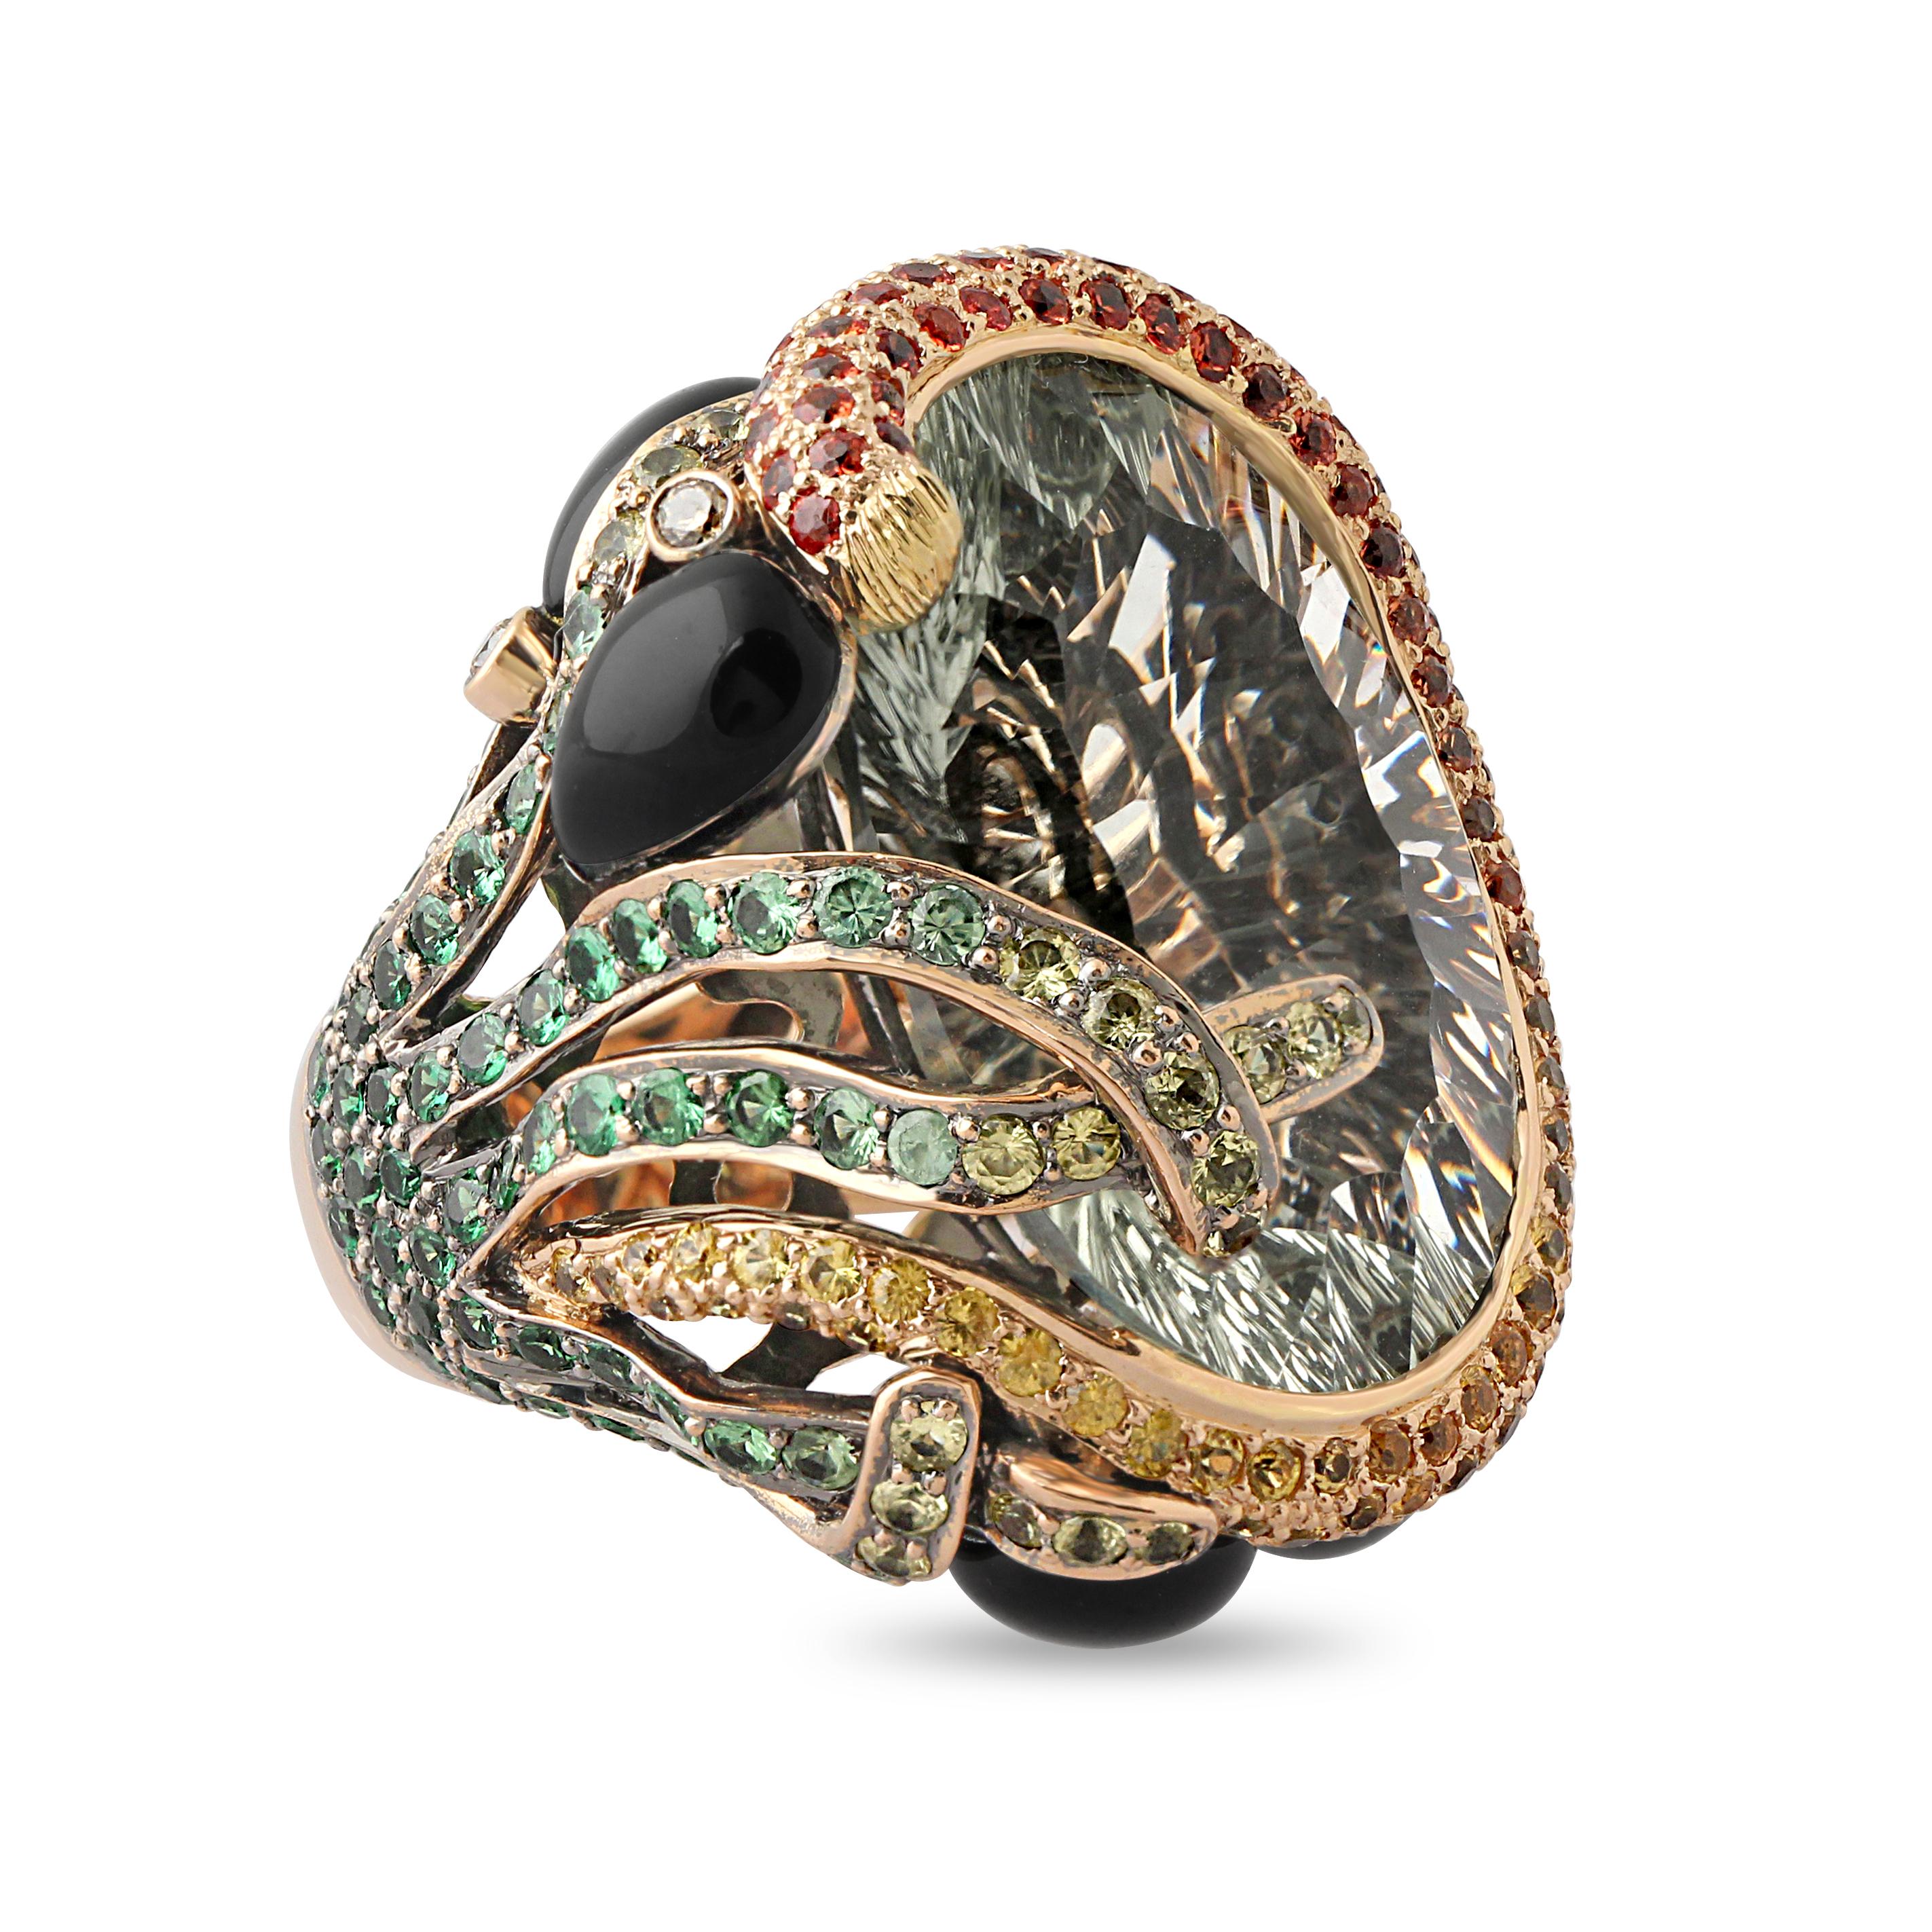 A striking gold and gem-set cocktail ring. Set at the centre with a large light green quartz surrounded by onyx, coloured sapphires and green garnet. Weight = 33.4 gr. Origin: French